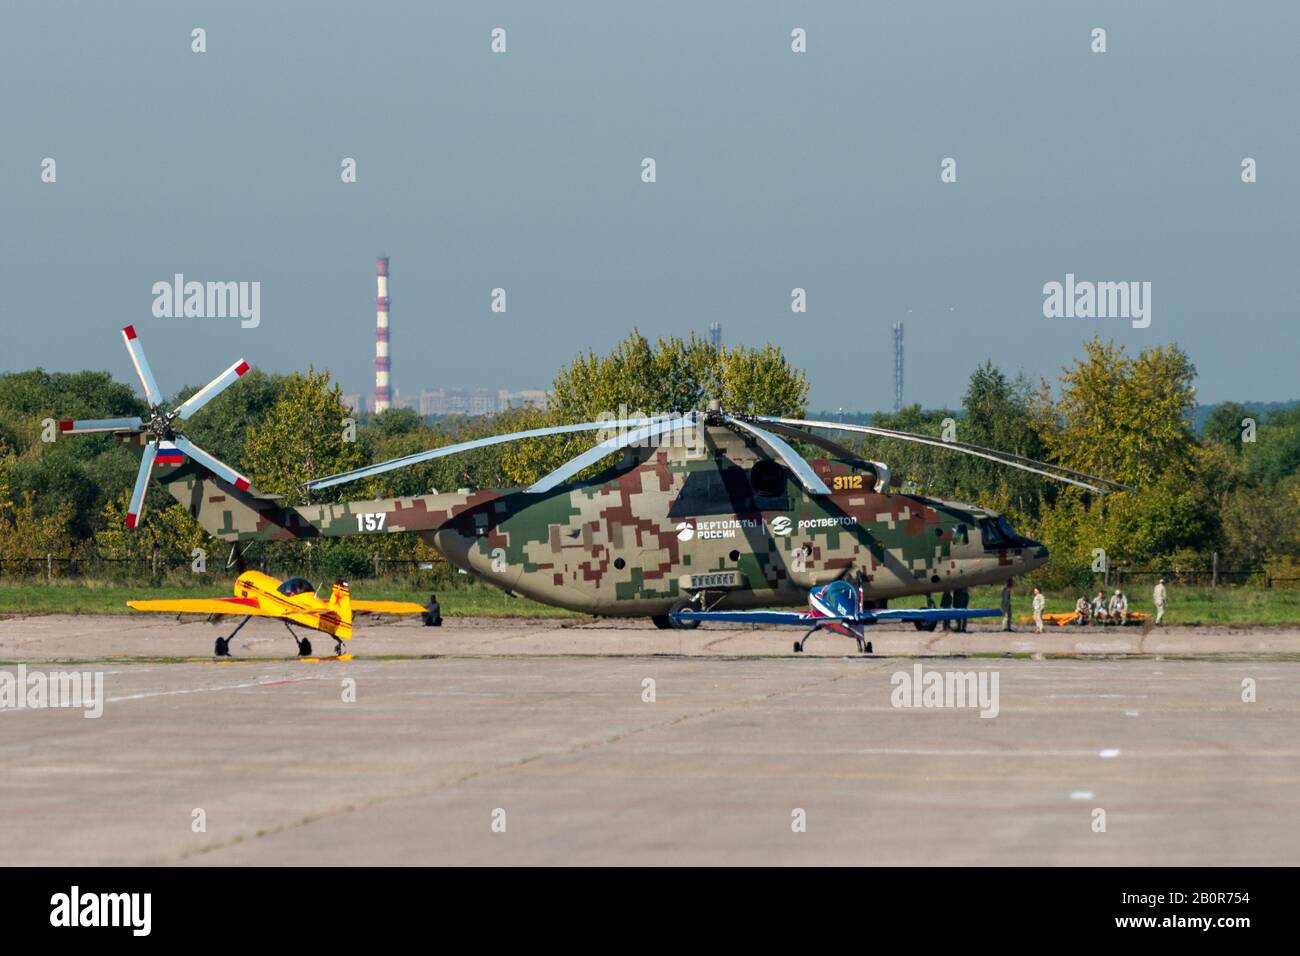 August 30, 2019. Zhukovsky, Russia. Russian heavy multi-purpose transport helicopter Mil Mi-26 at the International Aviation and Space Salon MAKS 2019 Stock Photo